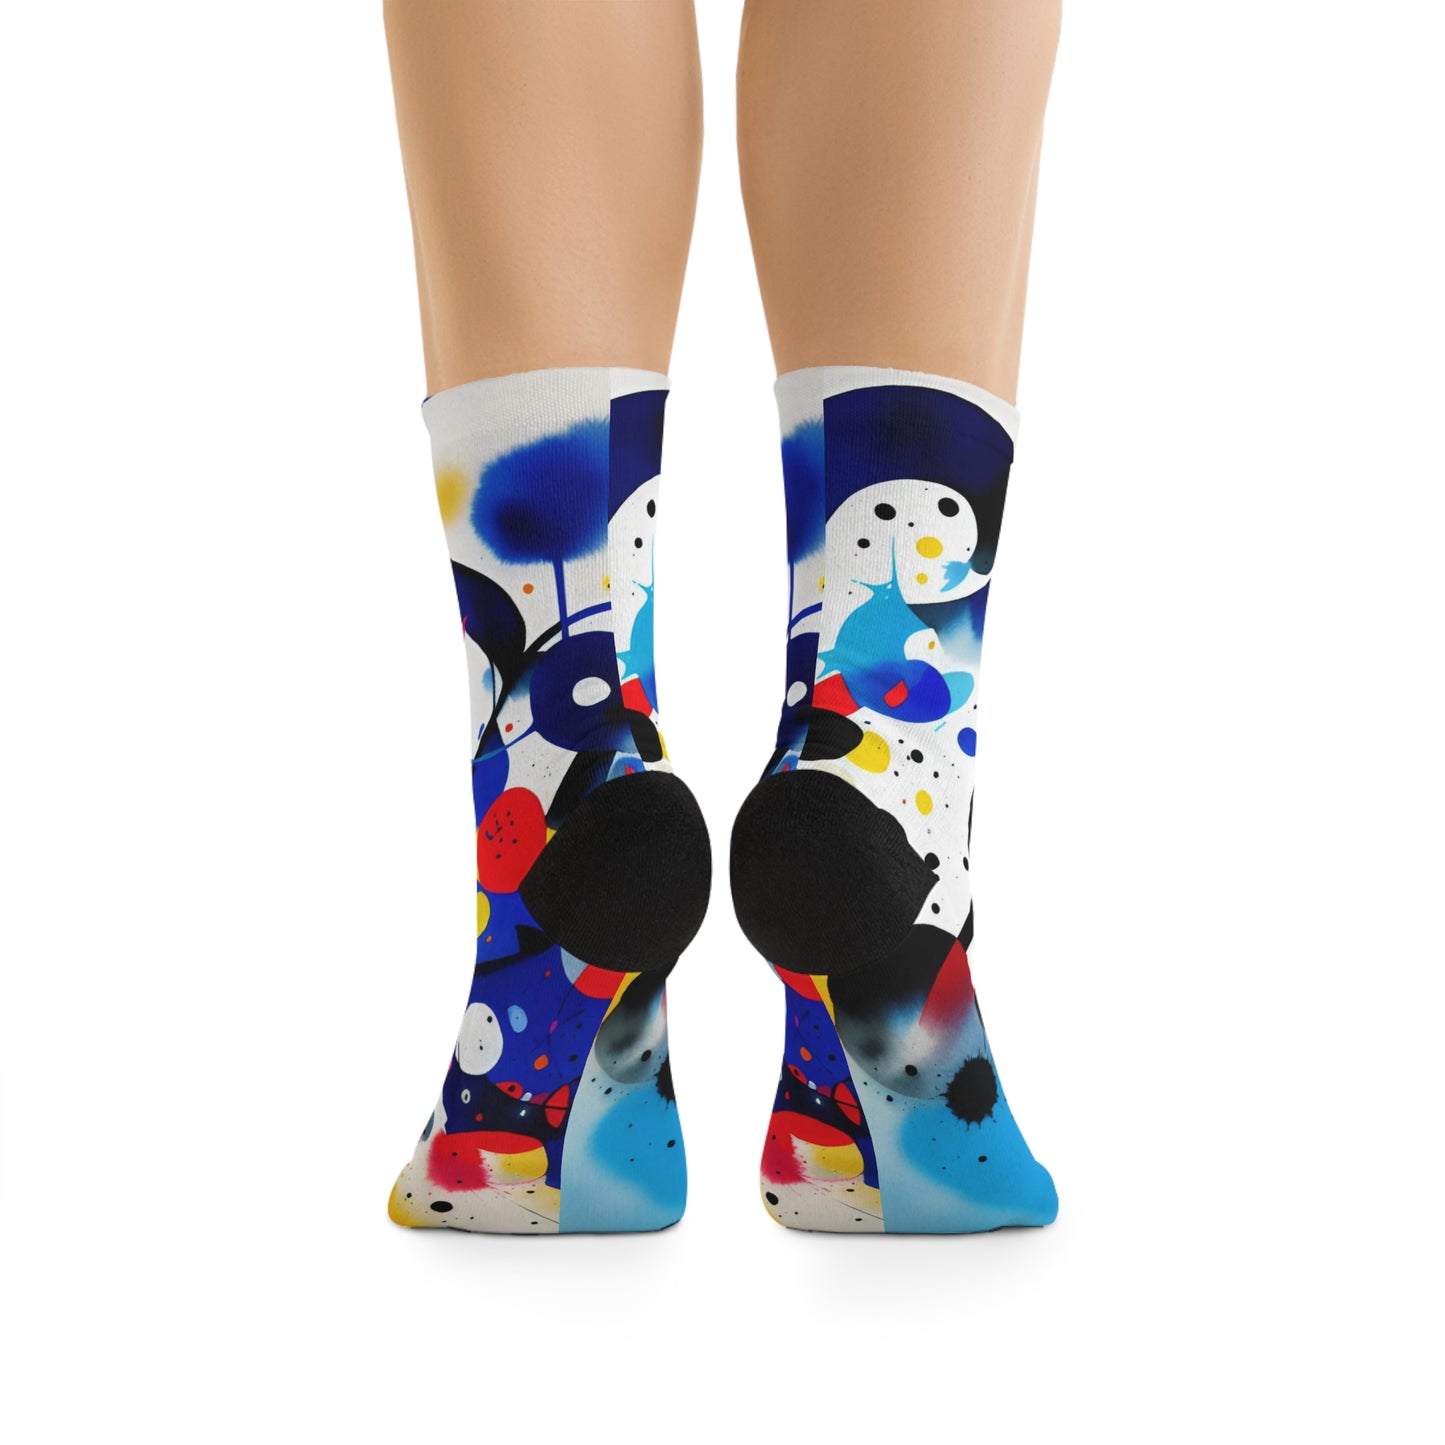 Recycled Poly Socks, Inspired by Miro